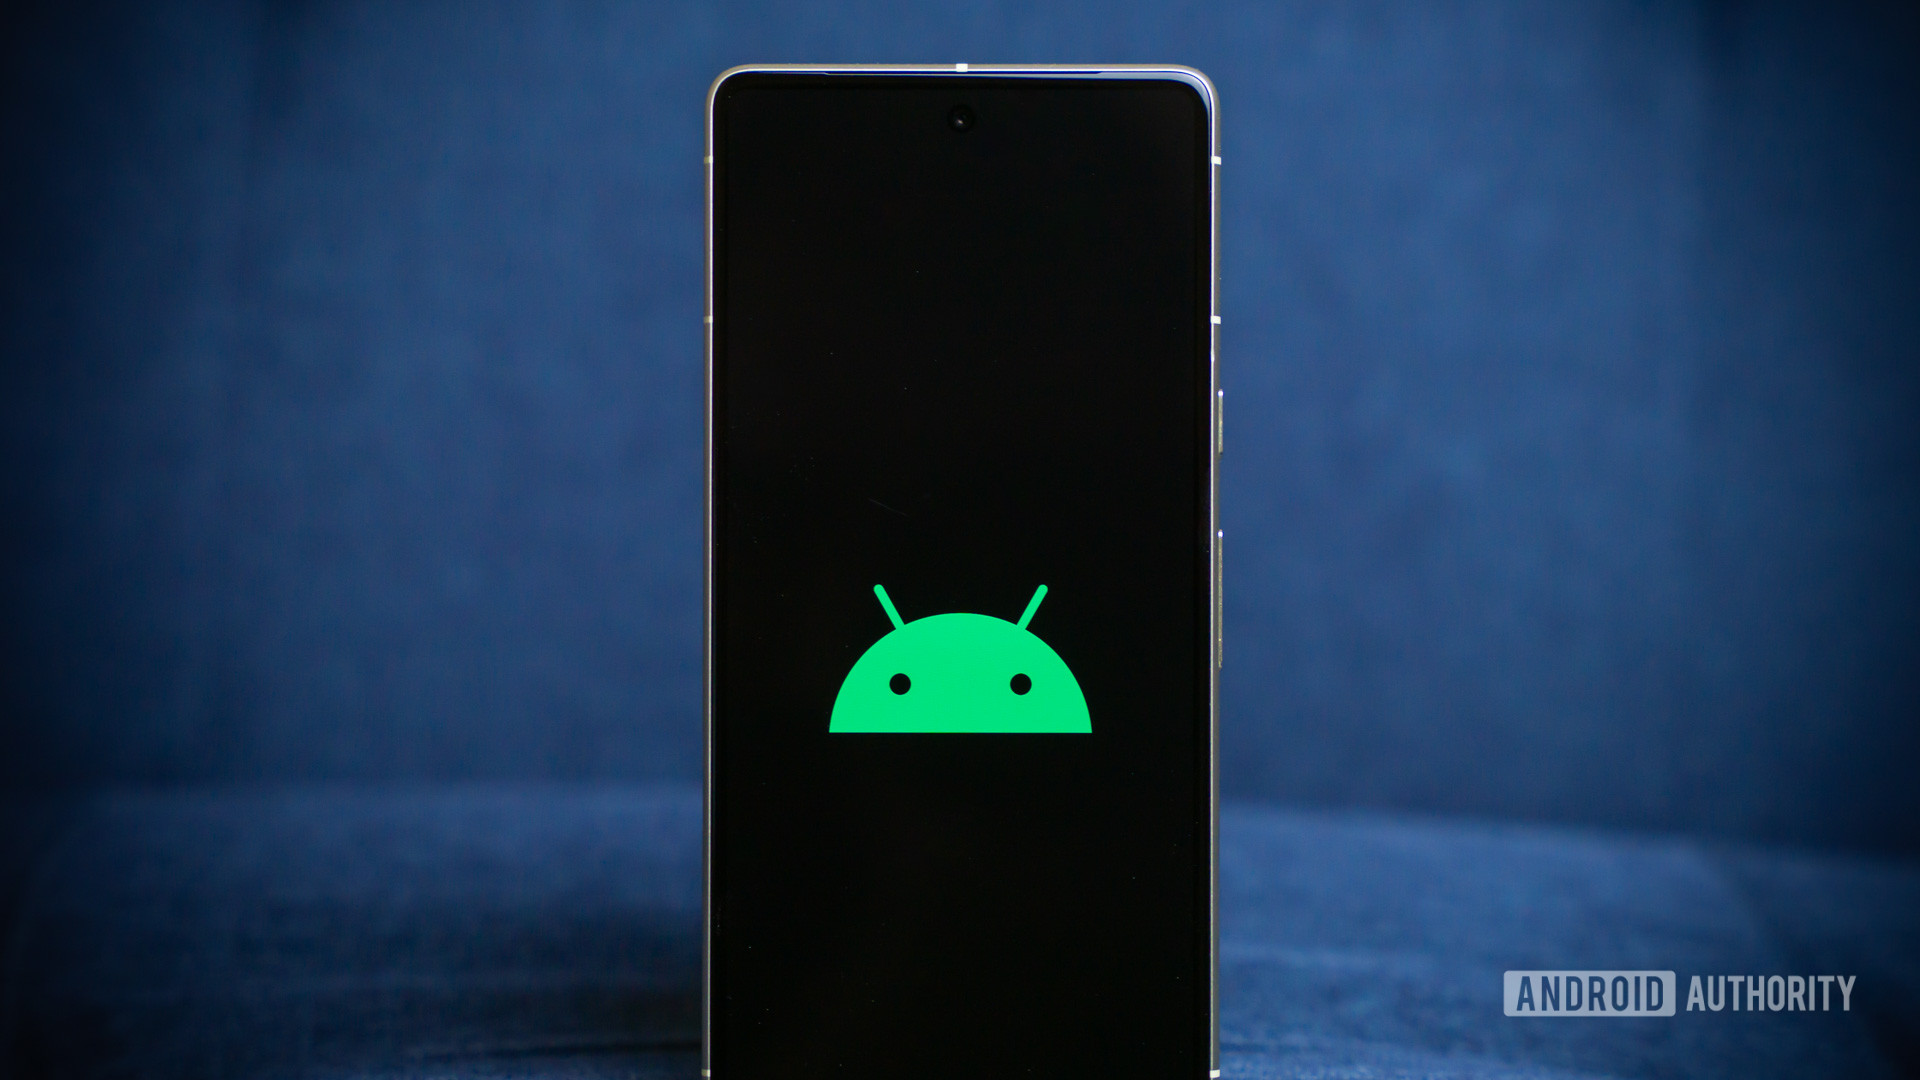 Android logo on smartphone stock photo (7)